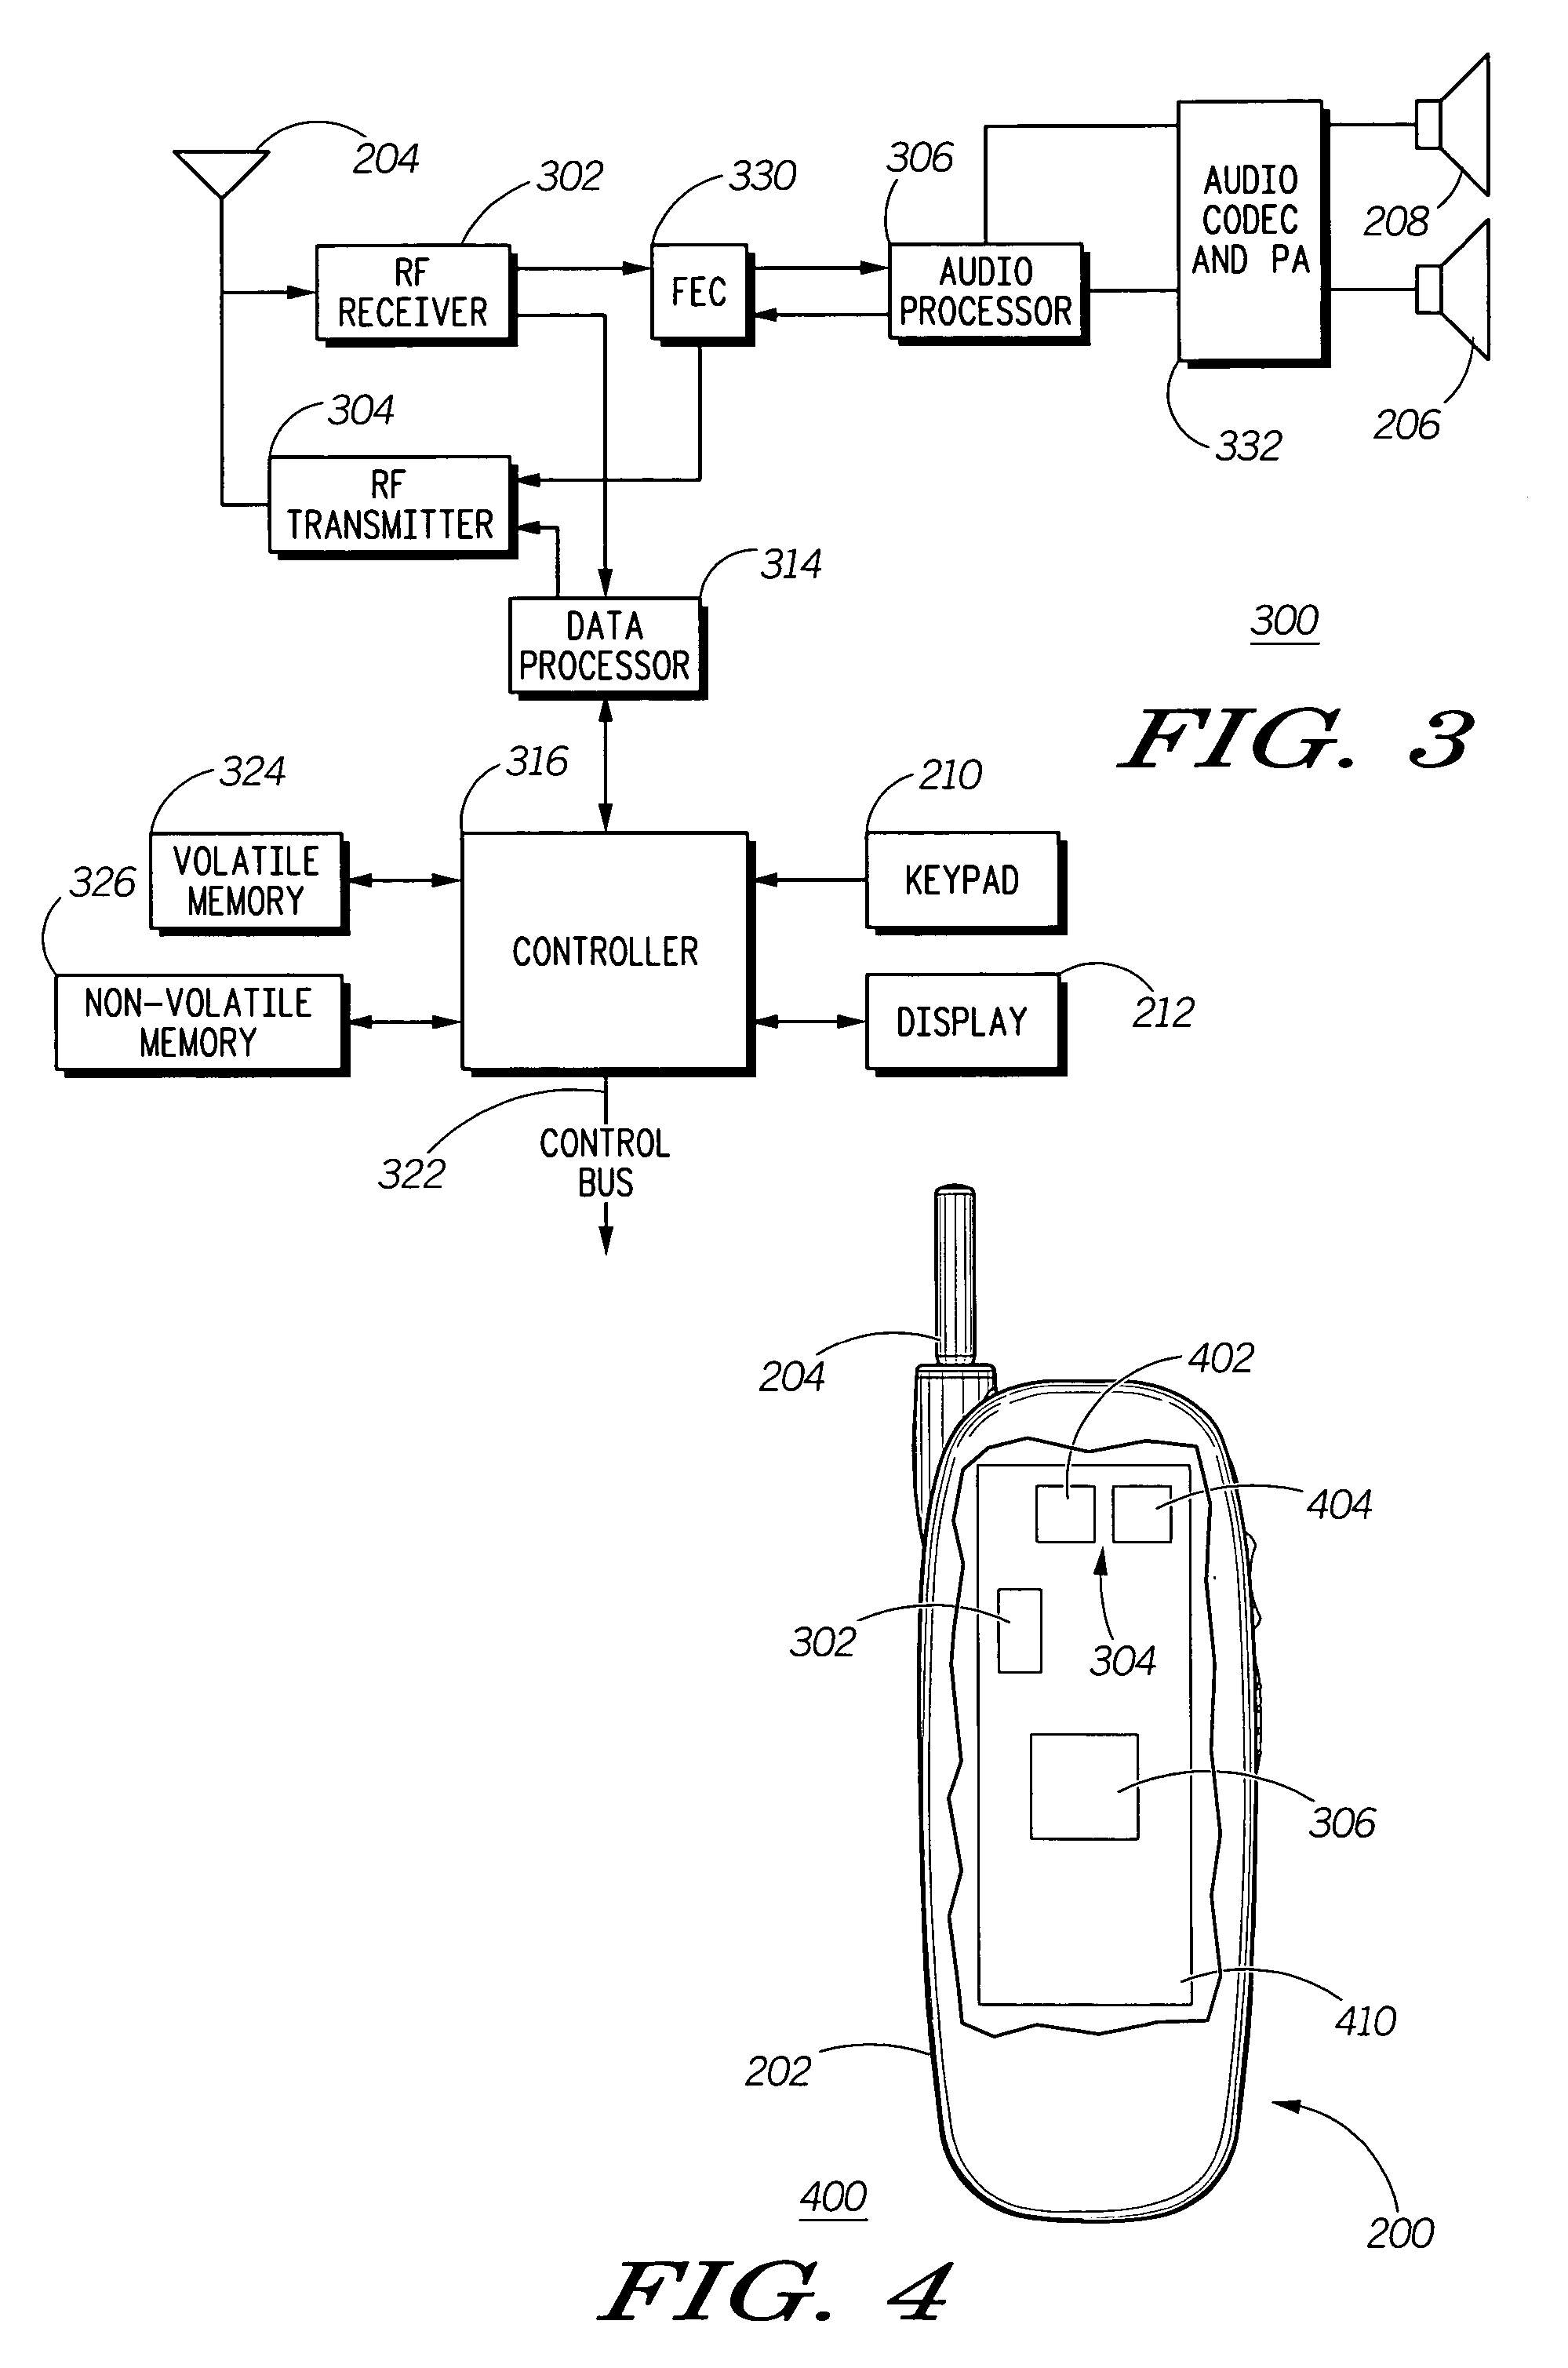 Amplifier with varying supply voltage and input attenuation based upon supply voltage